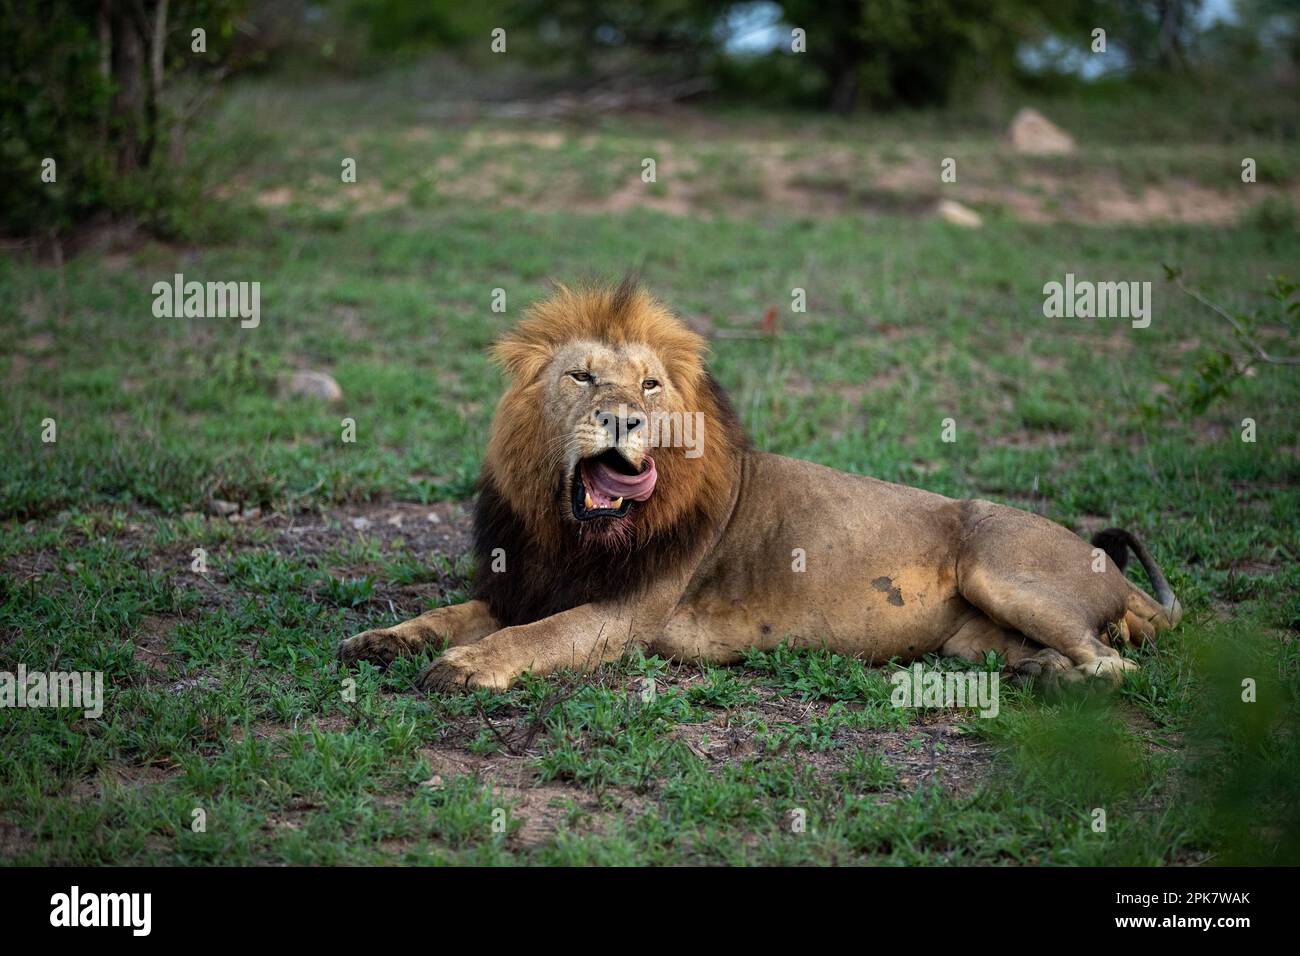 A male Lion, Panthera leo, yawning with his tongue out. Stock Photo